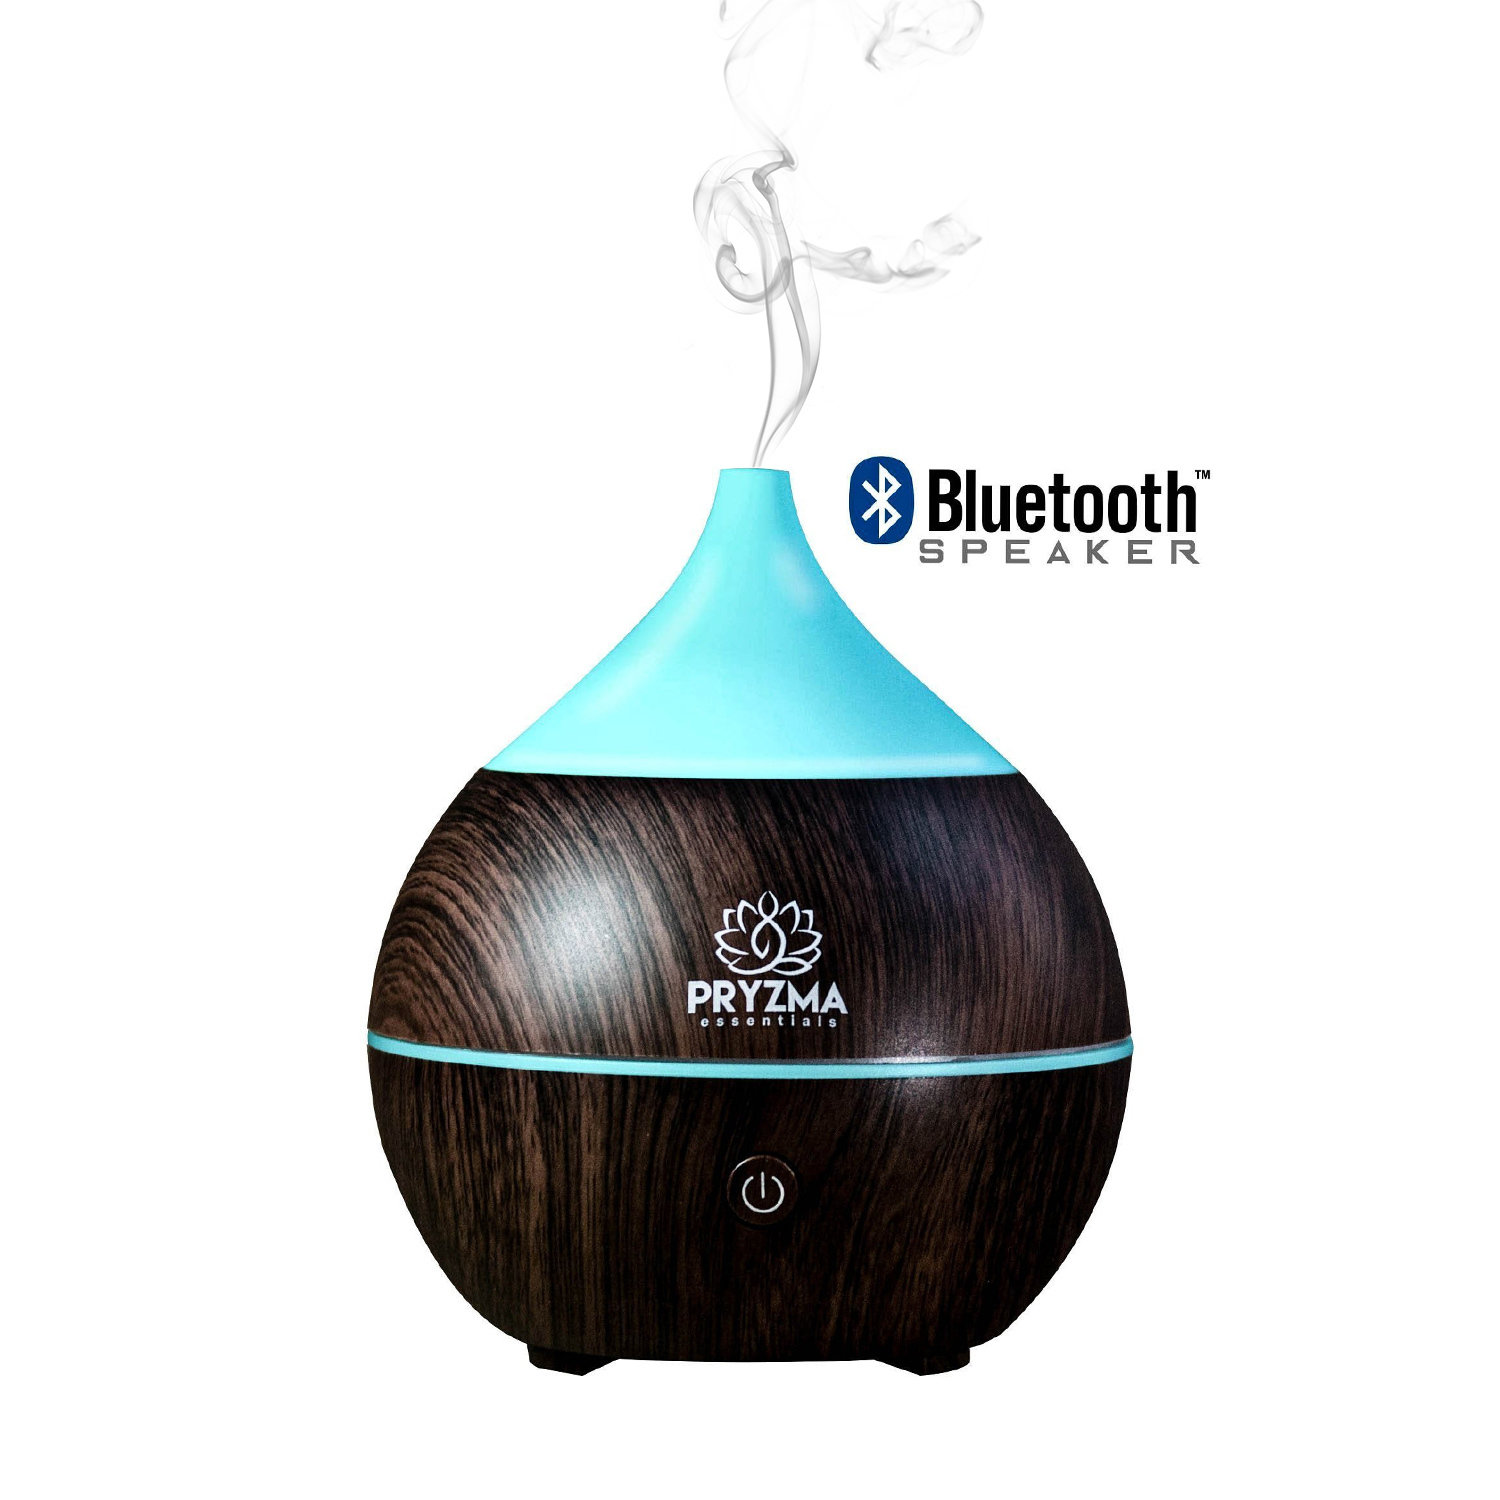 Pryzma Essentials Aromatherapy Diffuser + 2 FREE 10ml Diffusion Blends